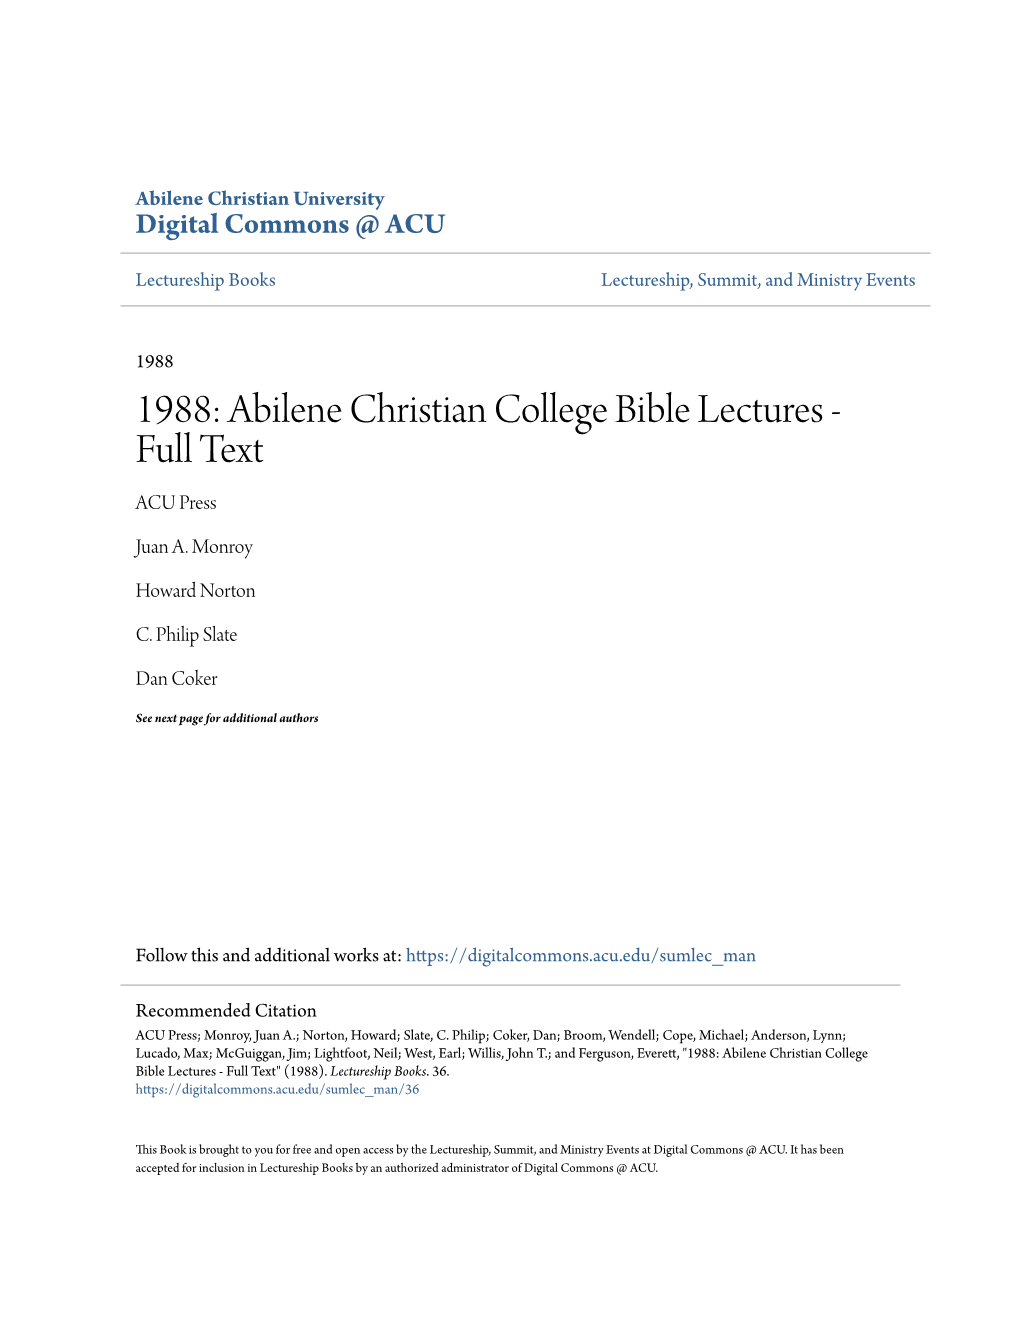 Abilene Christian College Bible Lectures - Full Text ACU Press